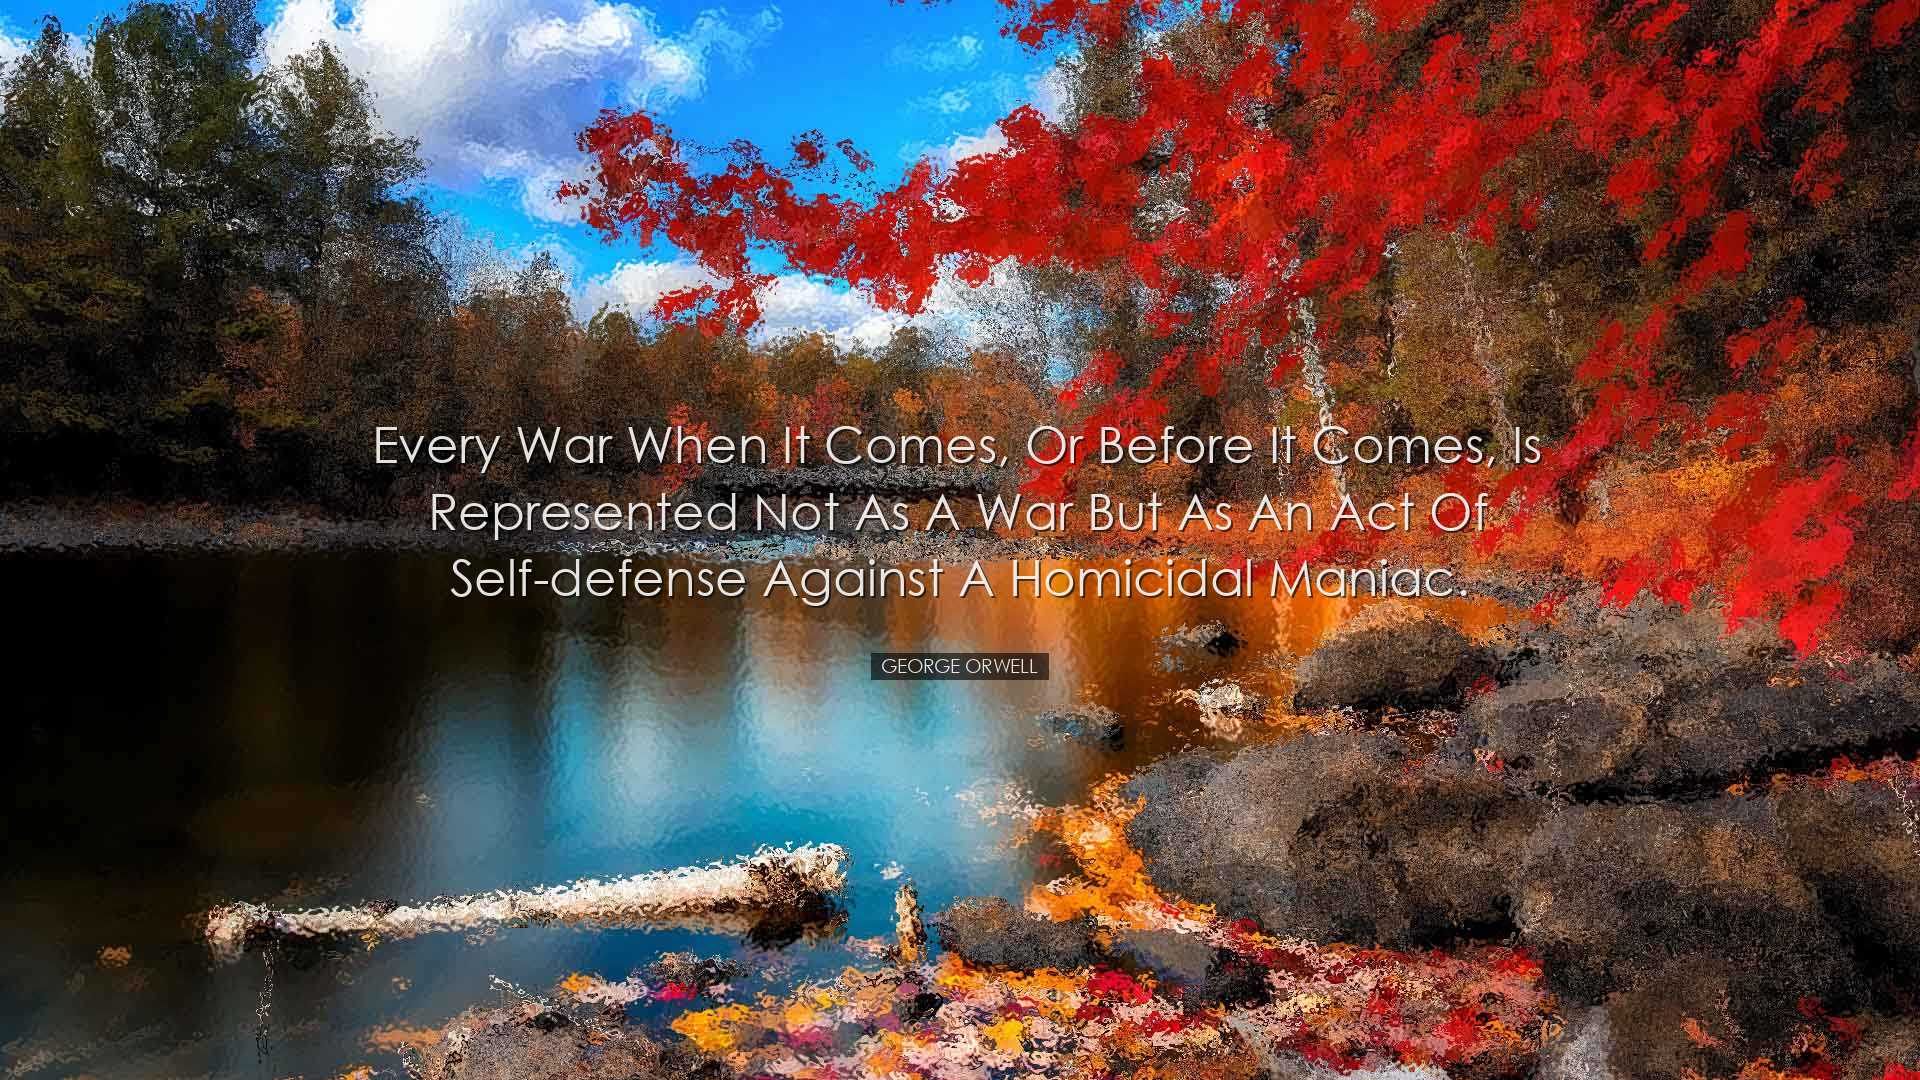 Every war when it comes, or before it comes, is represented not as